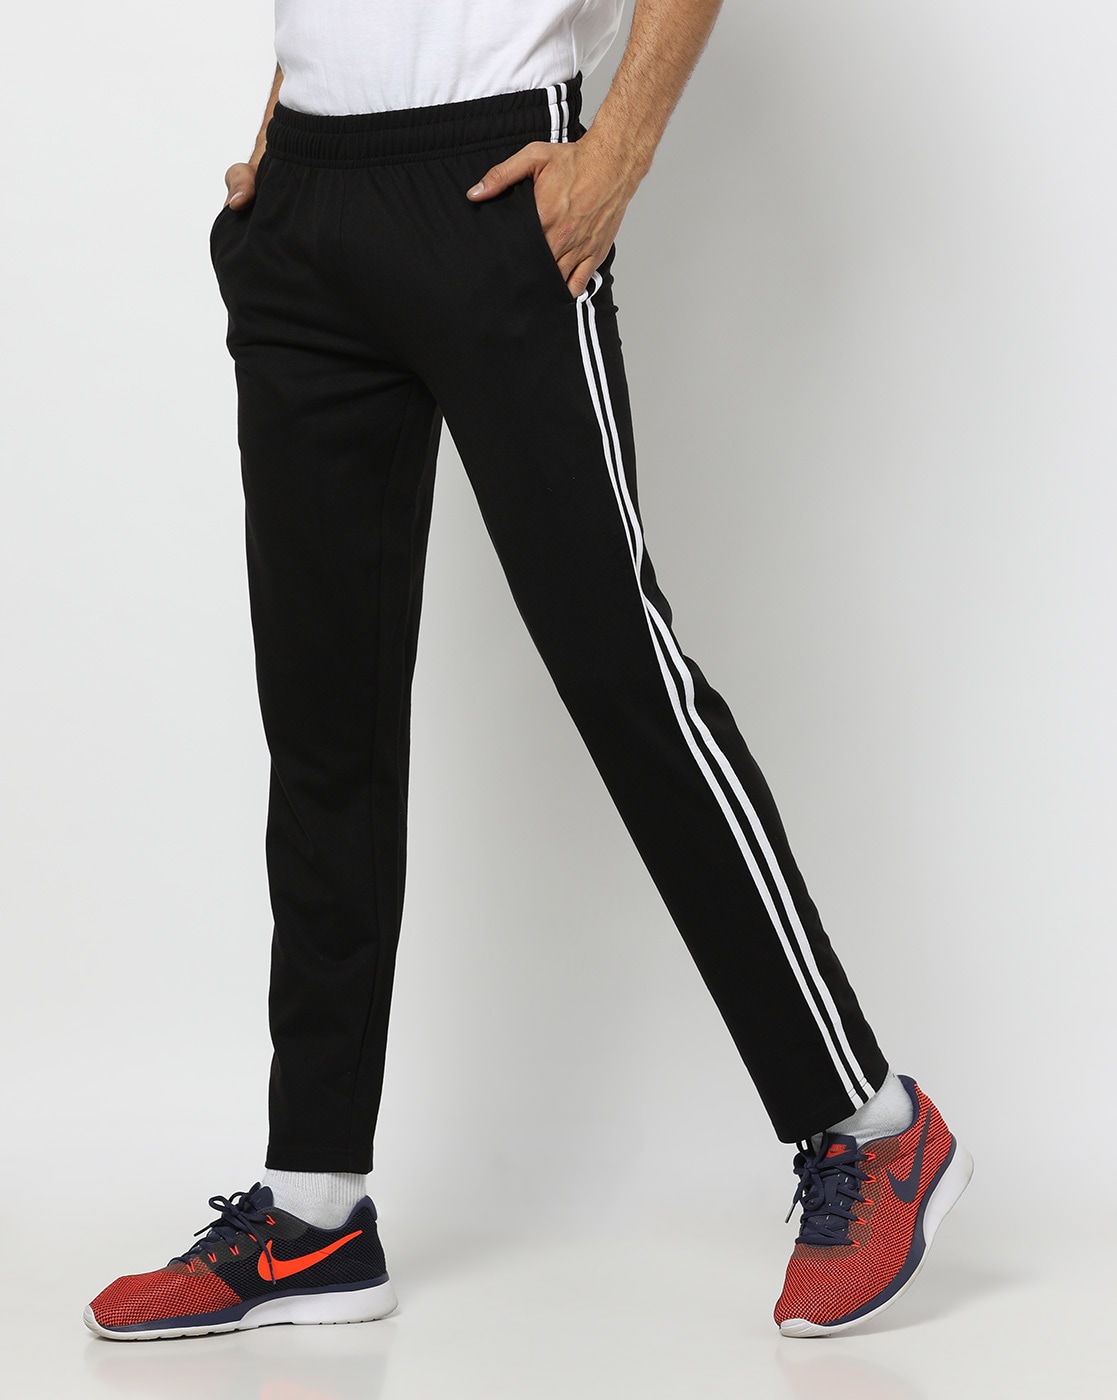 Buy Black Track Pants for Women by Q  RIOUS Online  Ajiocom